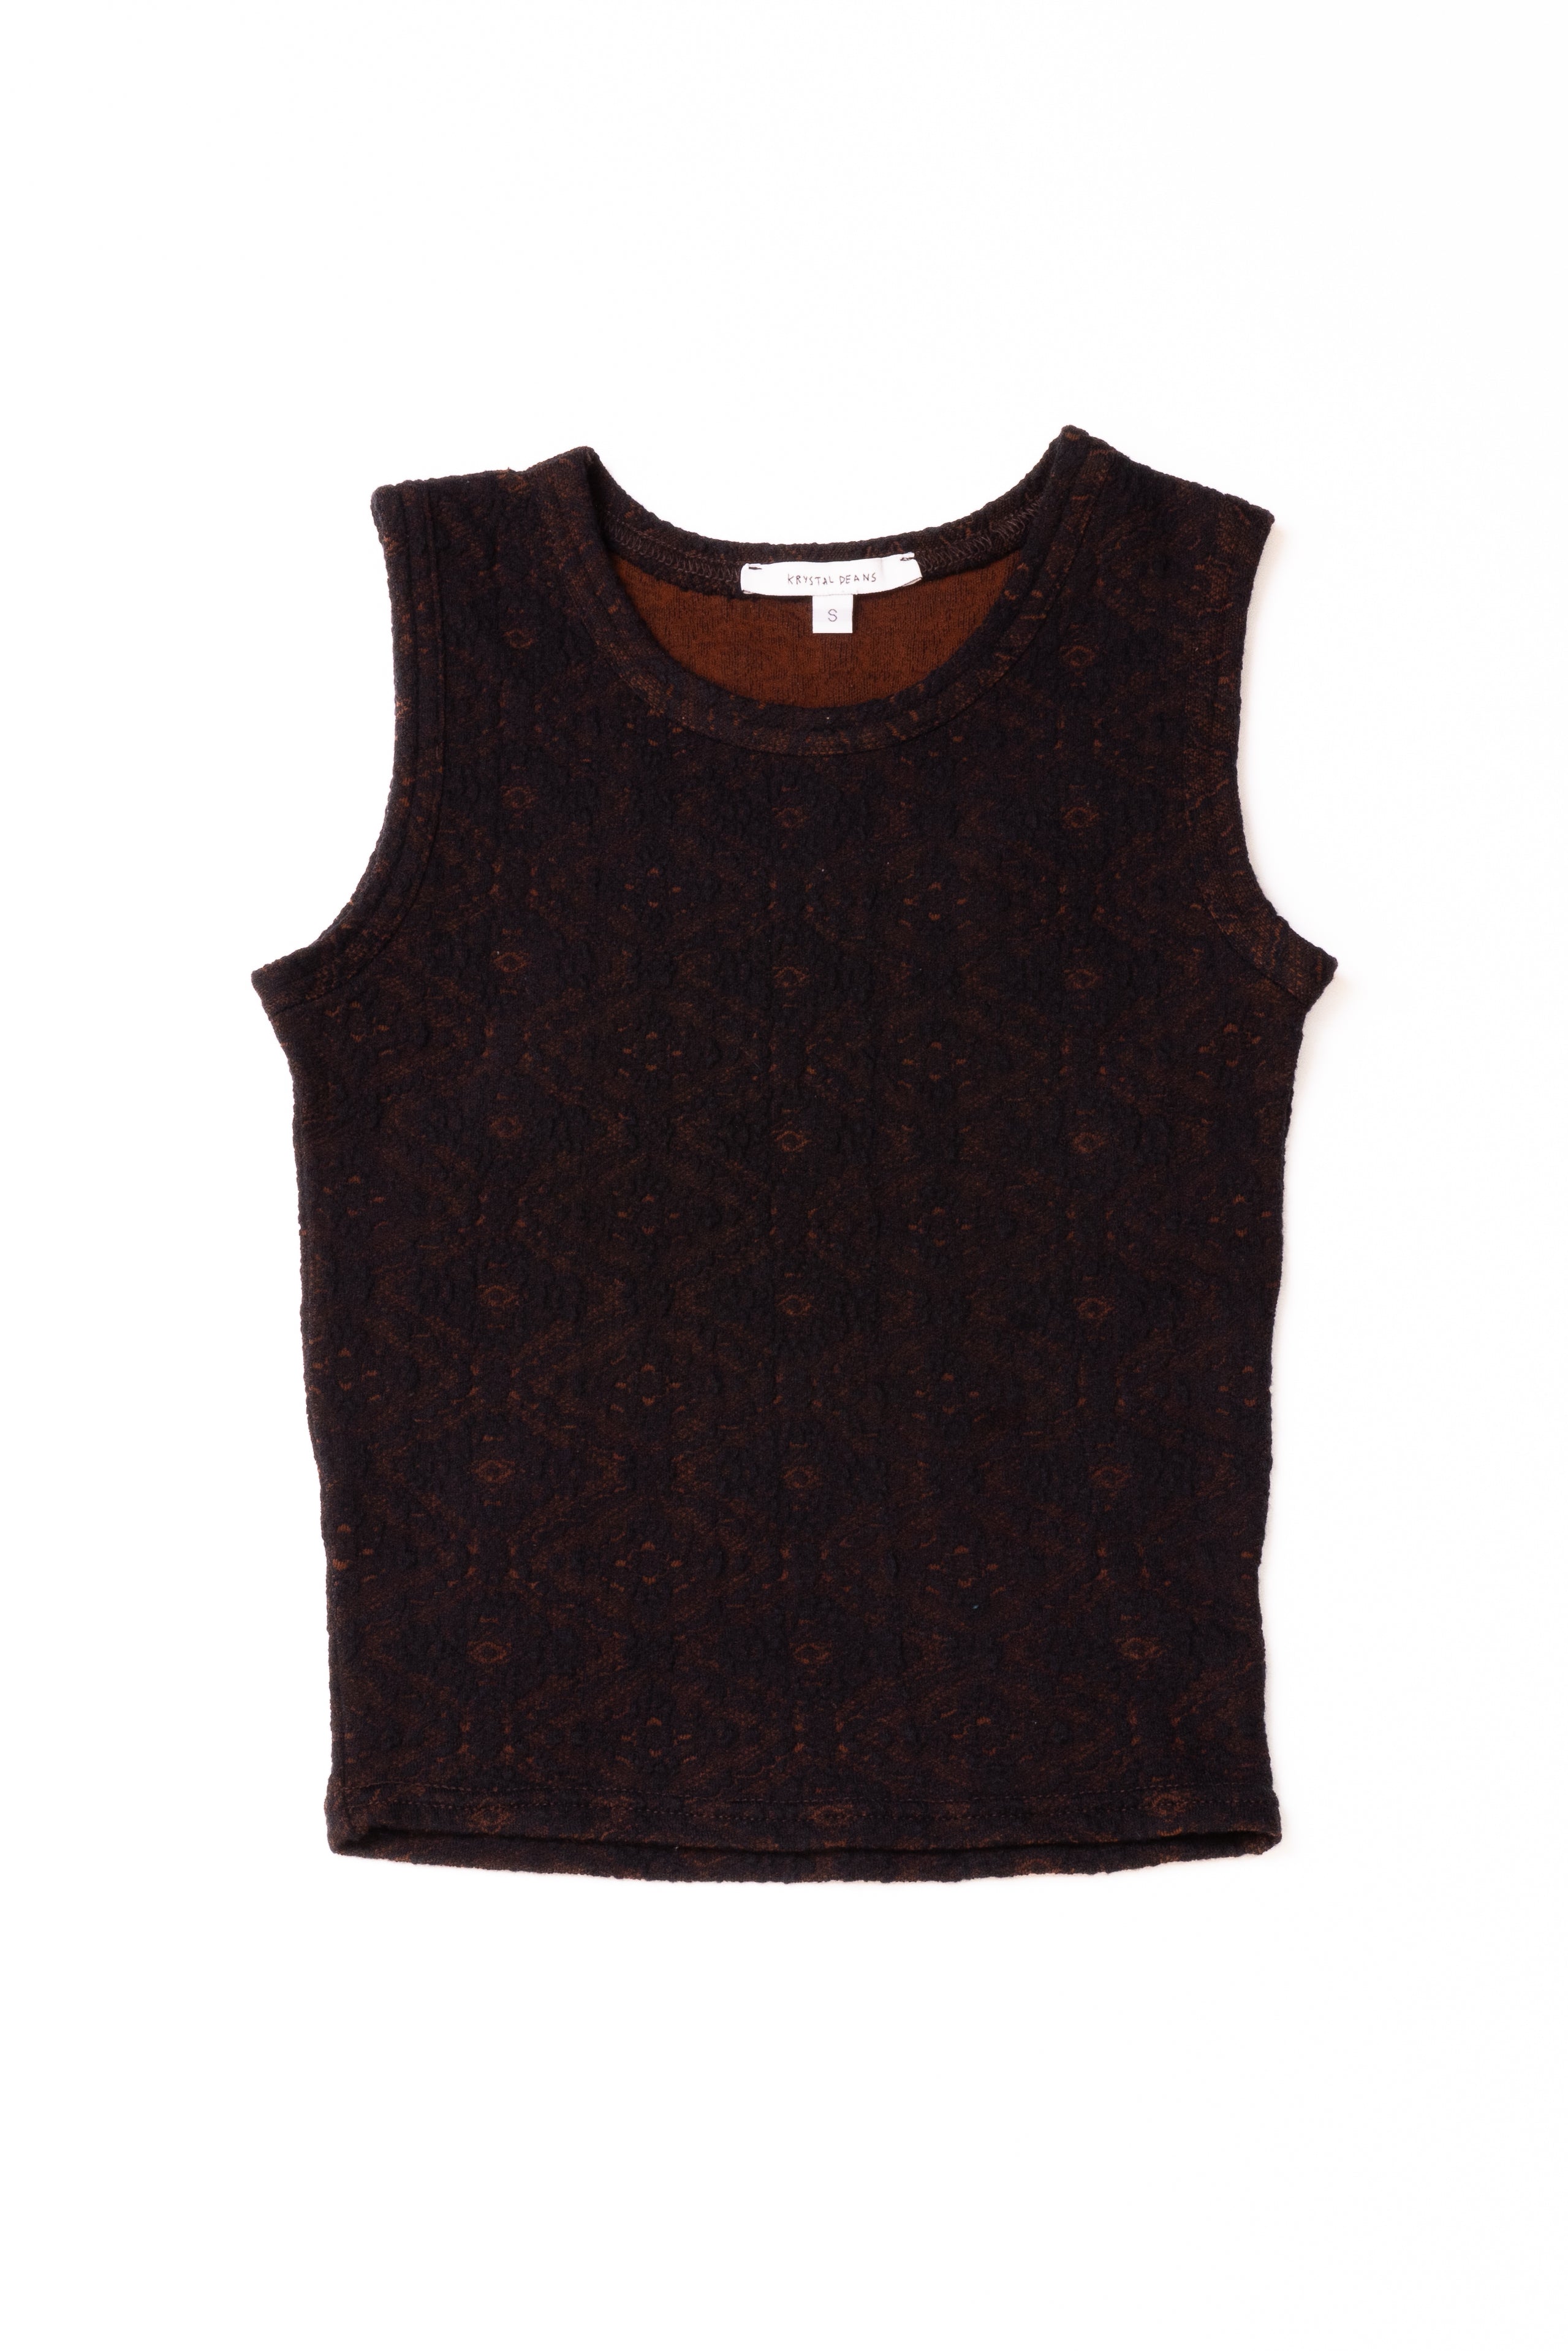 DIRTY LACE TANK | BROWN